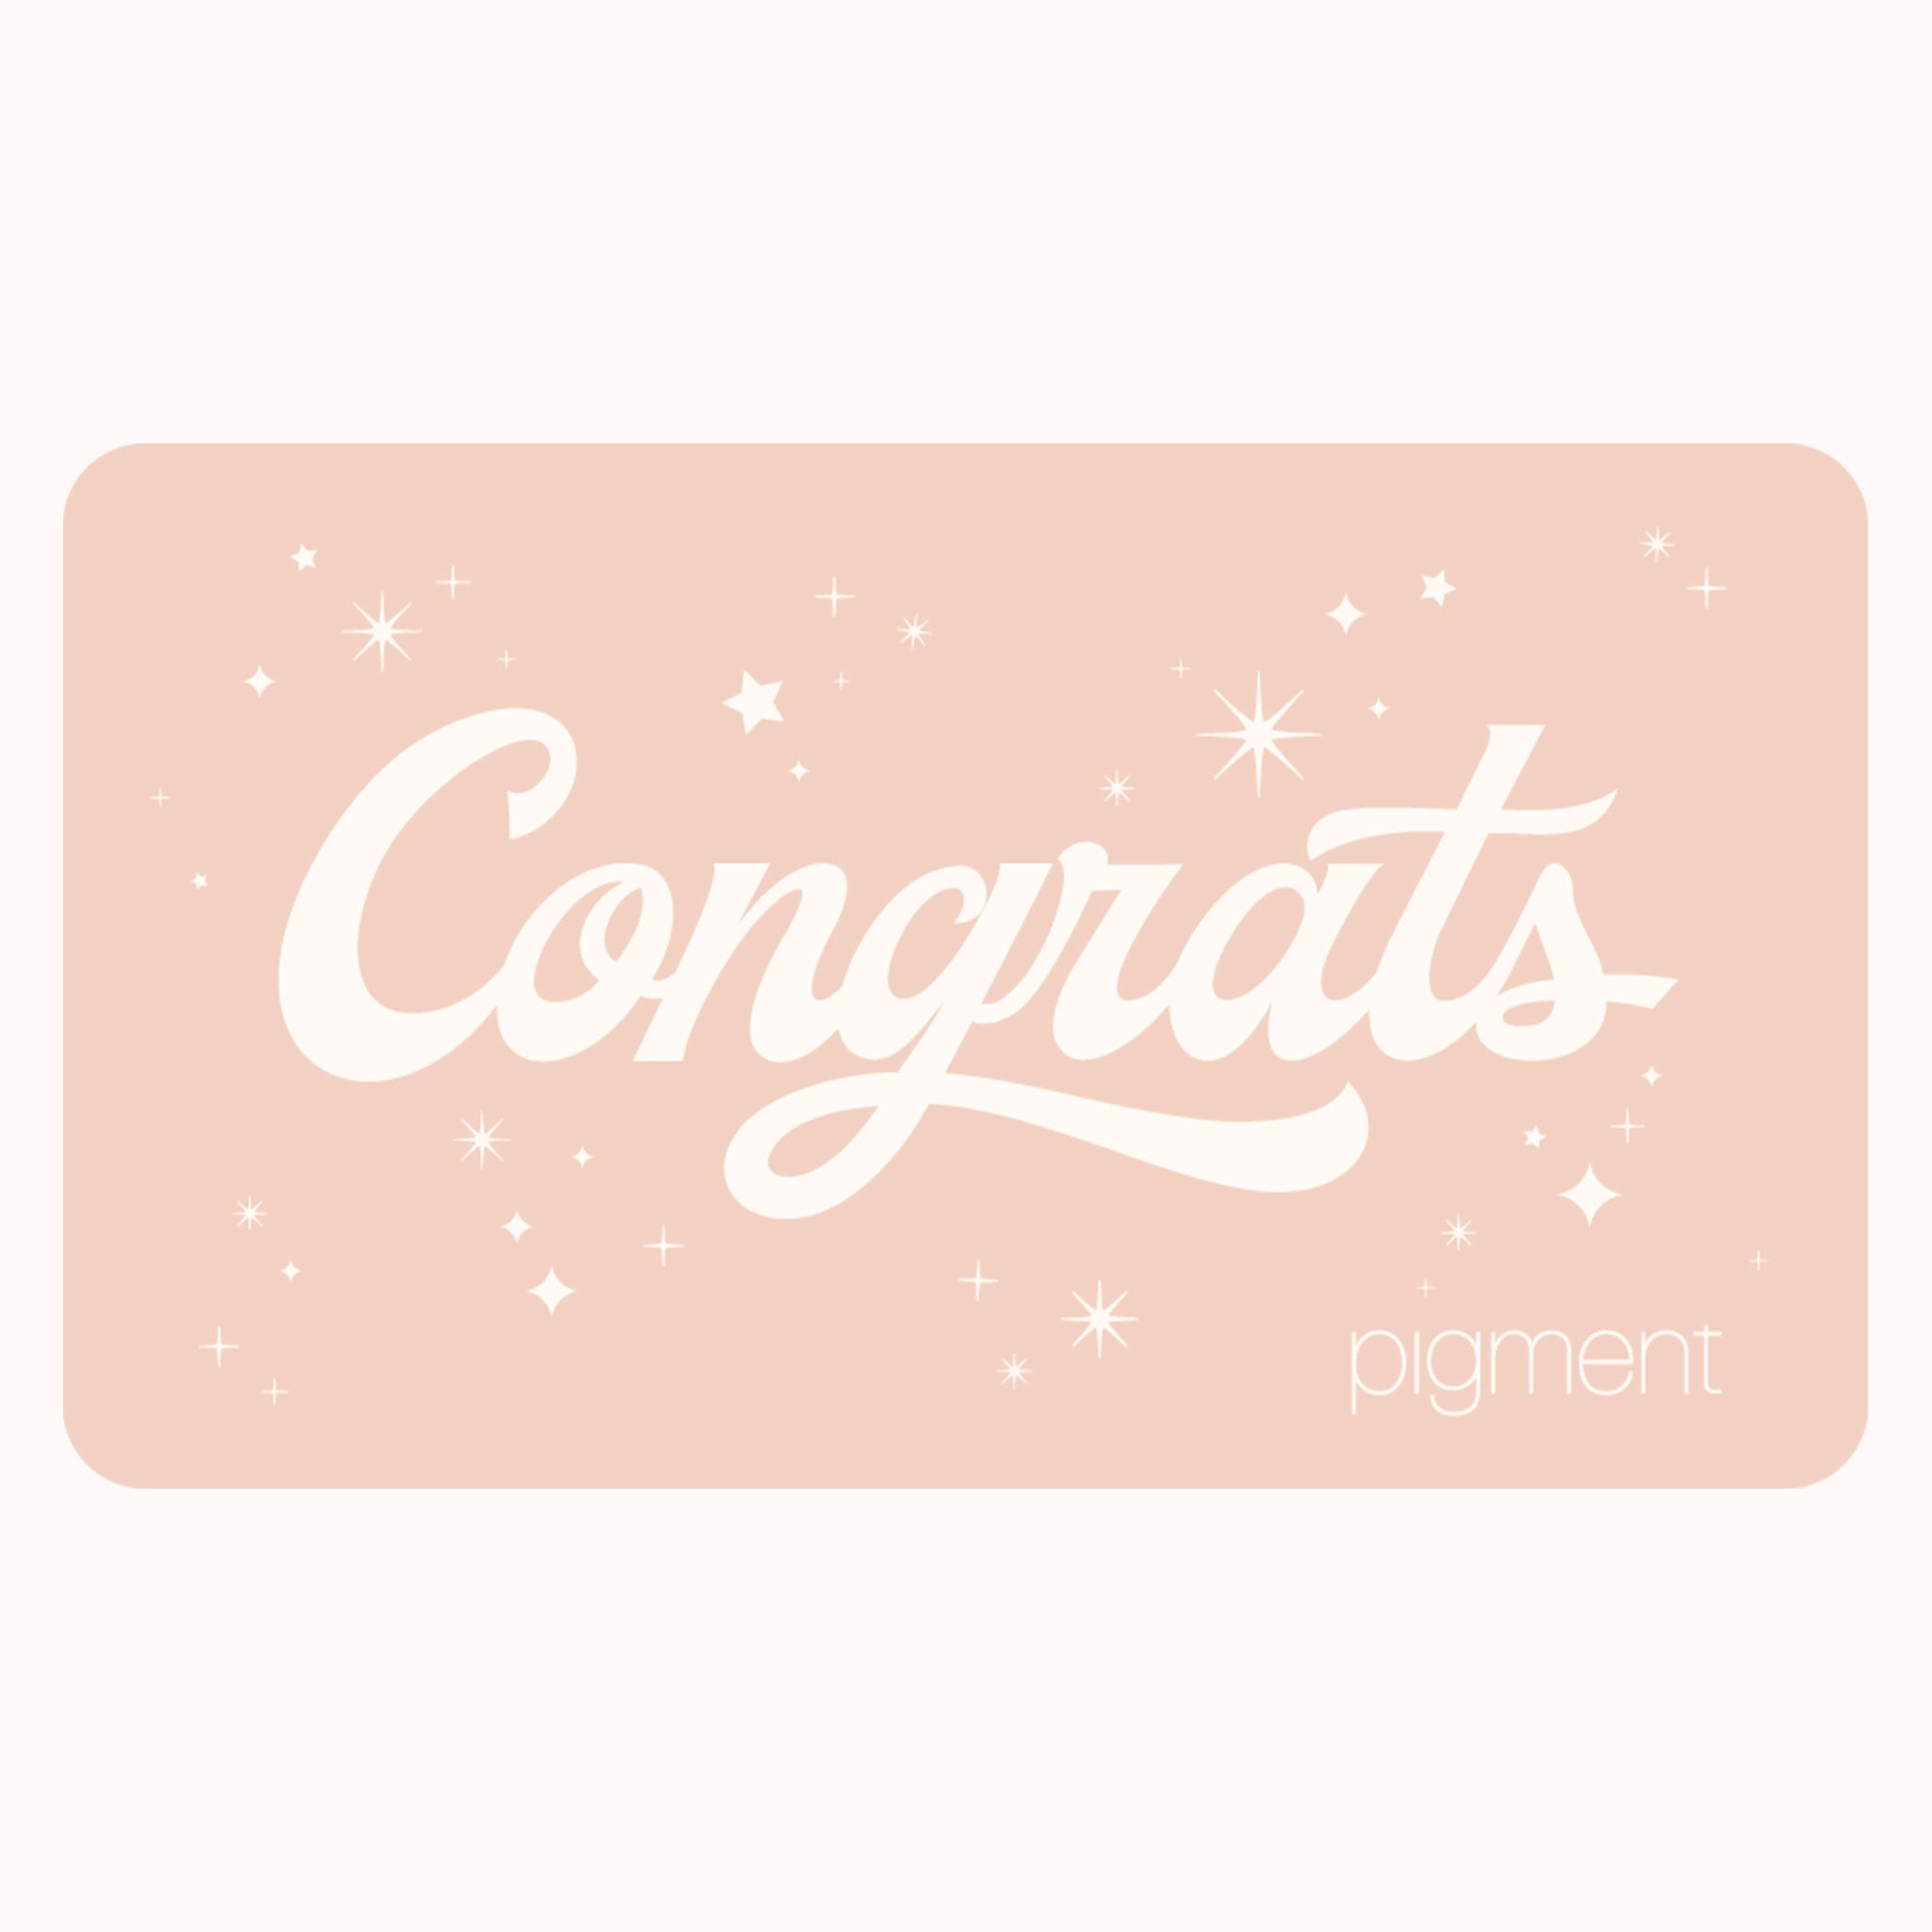 On a white background is a soft pink colored gift card detailed with white sparkle and star accents and white text across the front that reads, "Congrats" along with smaller text in the bottom right corner that says, "Pigment".